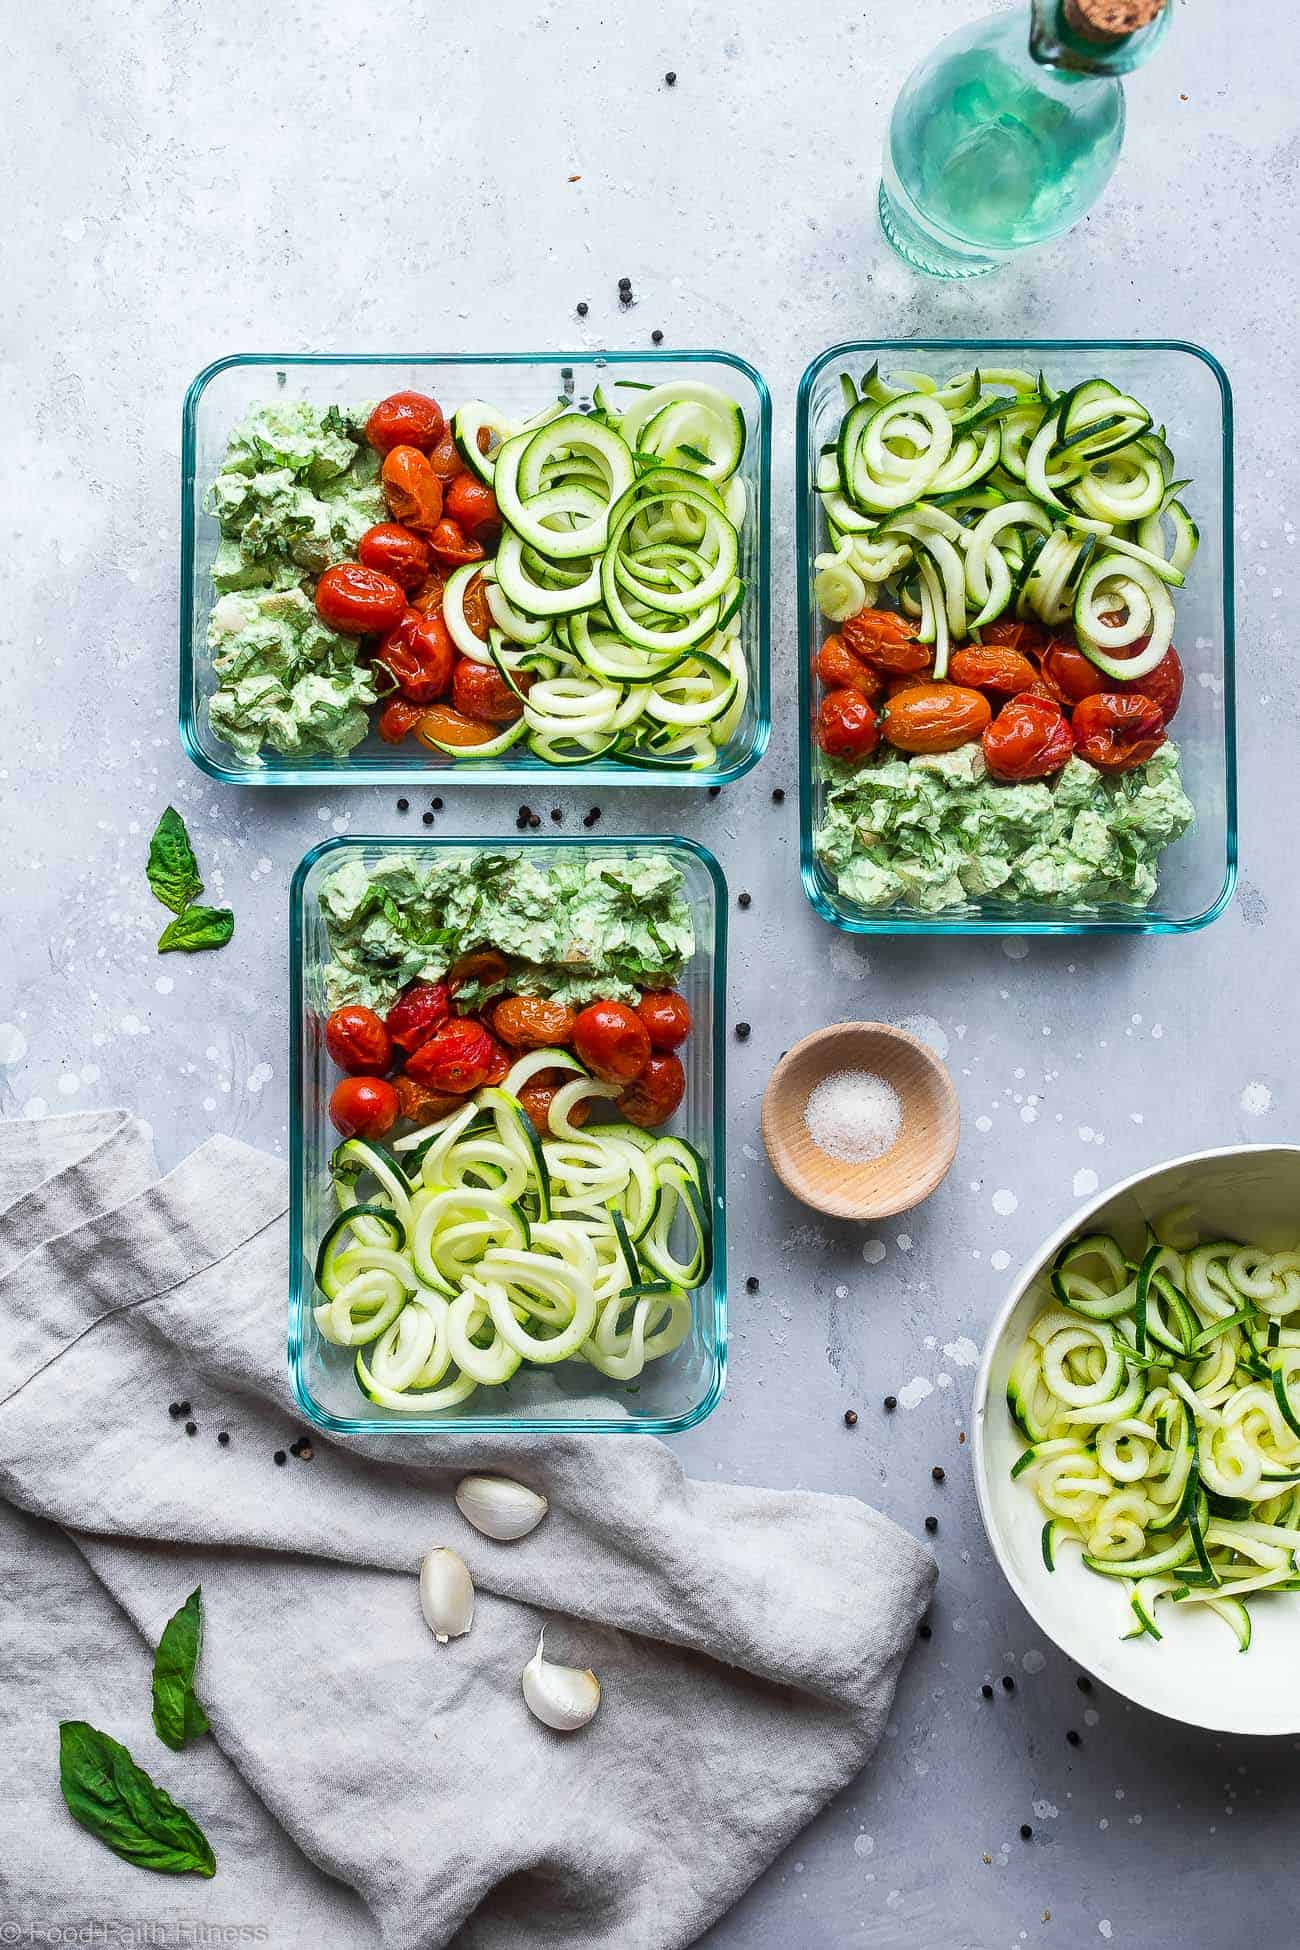 Greek Yogurt Pesto Chicken & Zucchini Noodle Meal prep Bowls - An easy, low carb, gluten free and protein packed work lunch! A healthy meal for kids or adults that's only 260 calories and 3 Freestyle points! | #Foodfaithfitness | #Lowcarb #glutenfree #healthy #mealprep #Greekyogurt